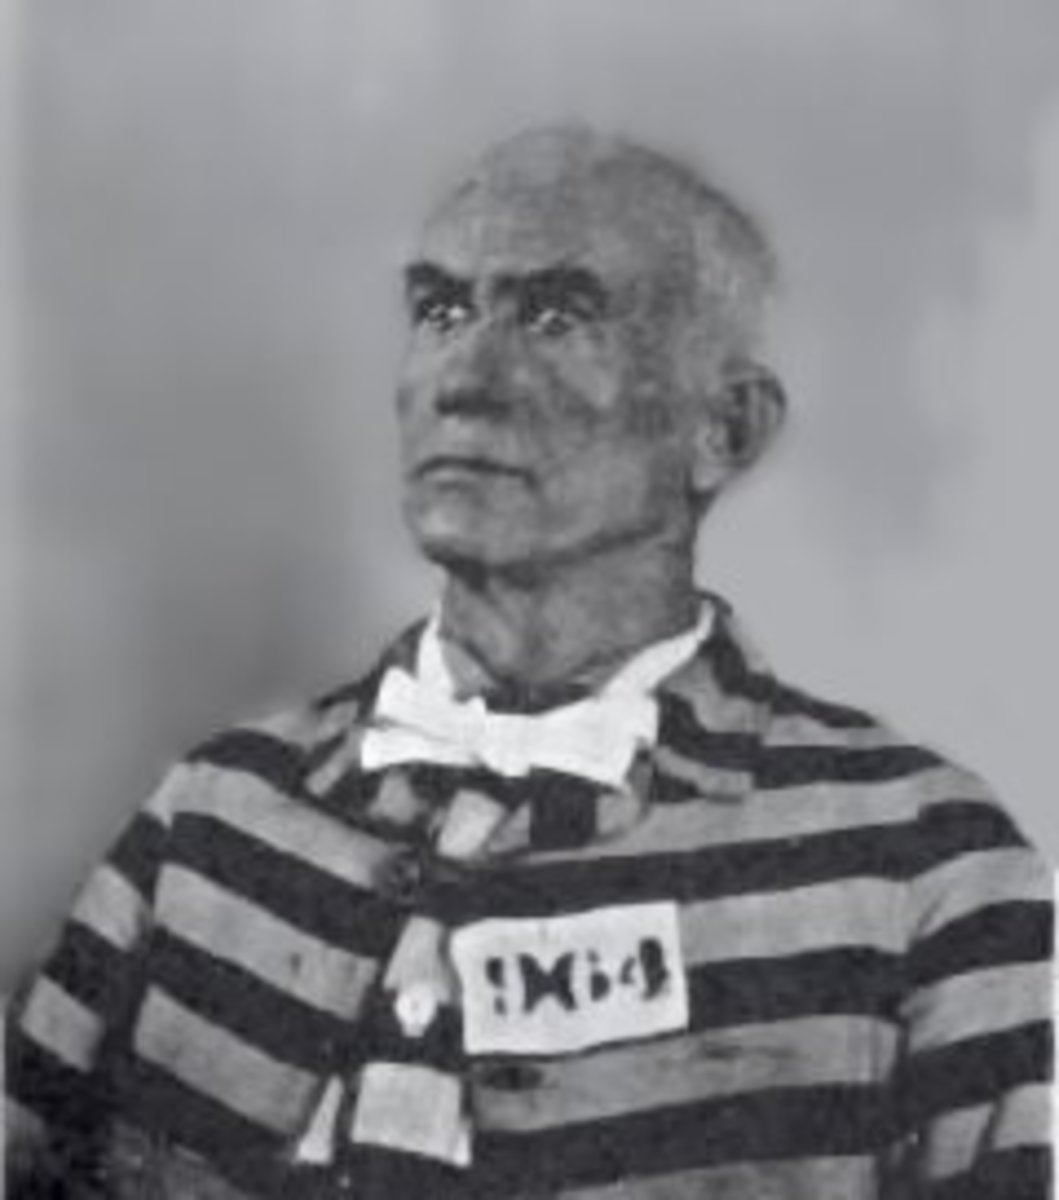 The Baron of Arizona in prison in 1895. He served time in prison for his intricate fraud.